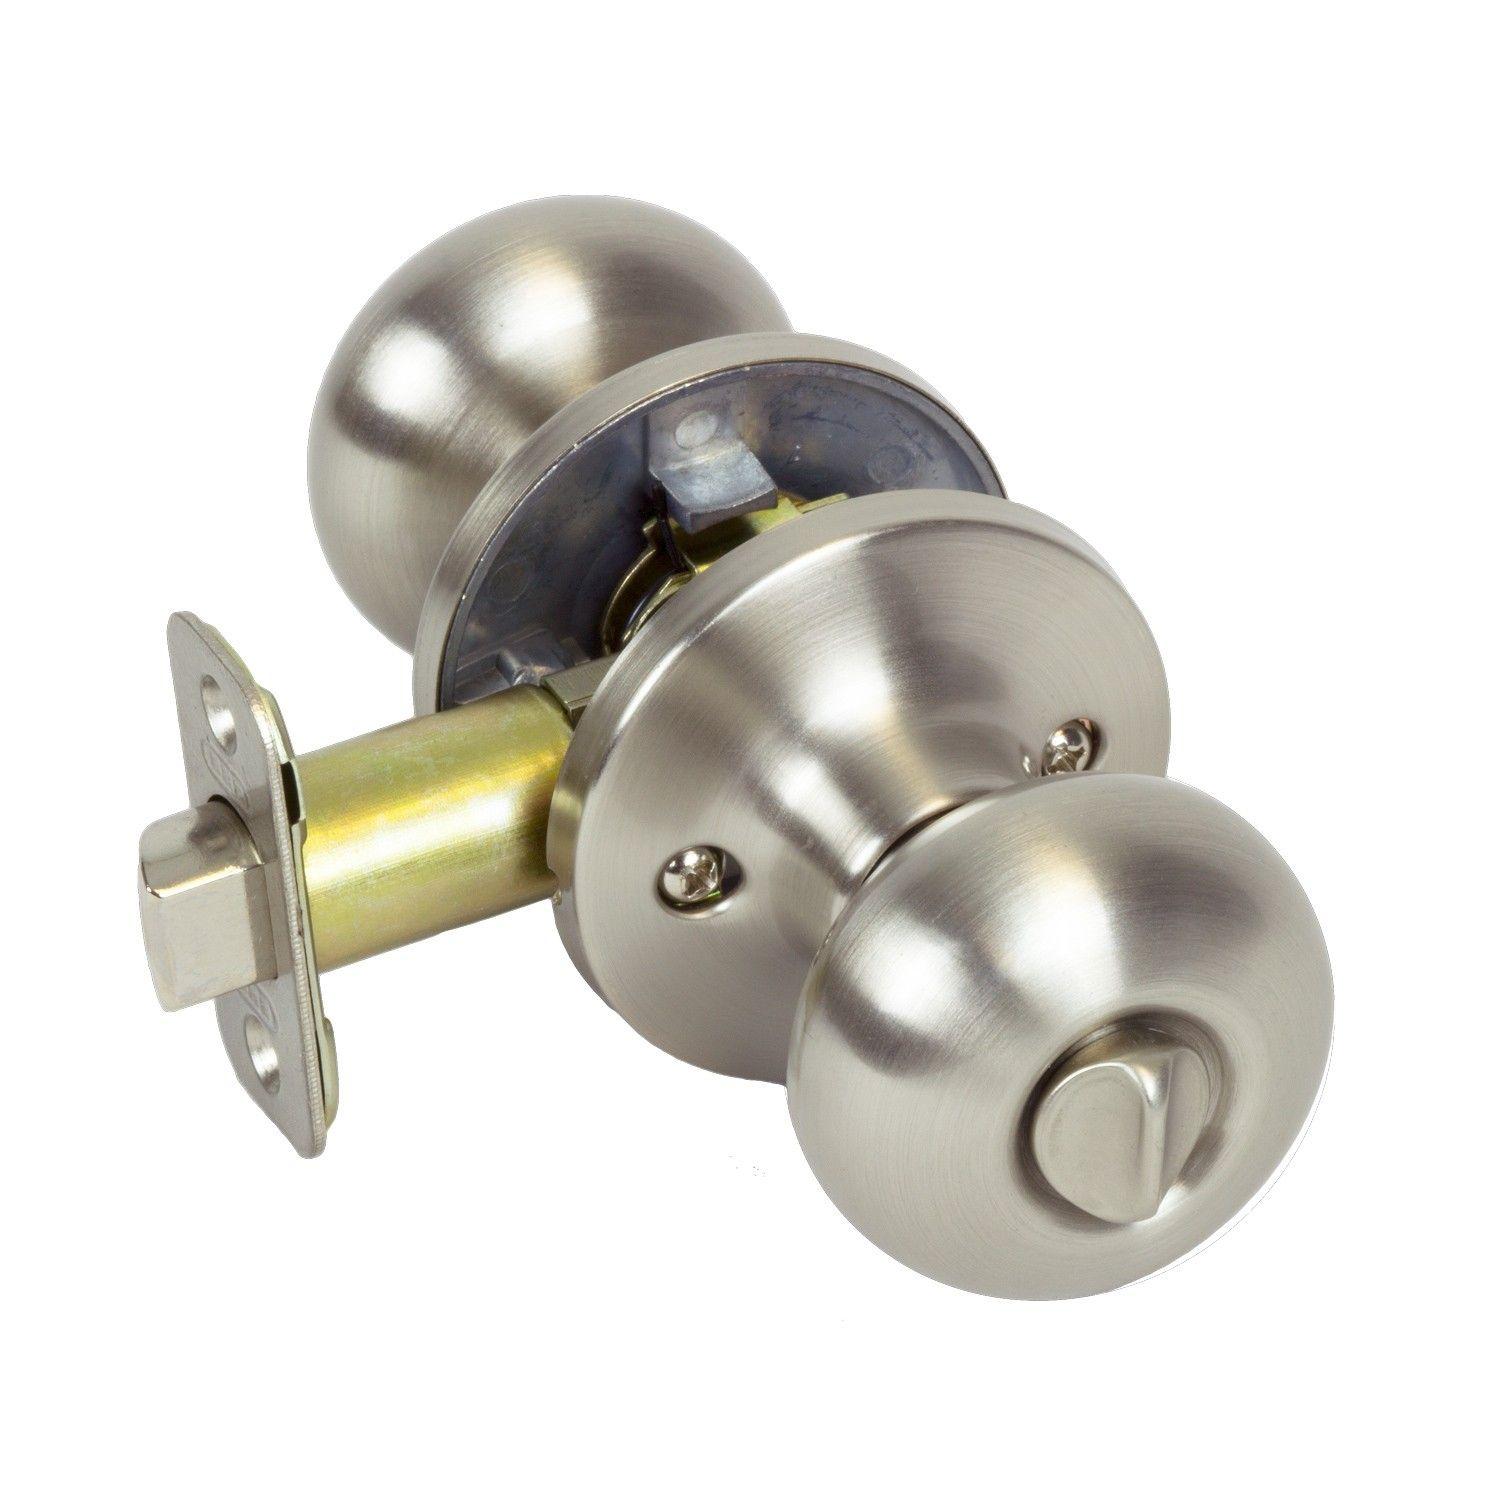 Bhp 52215sn Noe Valley Bed And Bath Round Mushroom Privacy Door Knob intended for proportions 1500 X 1500